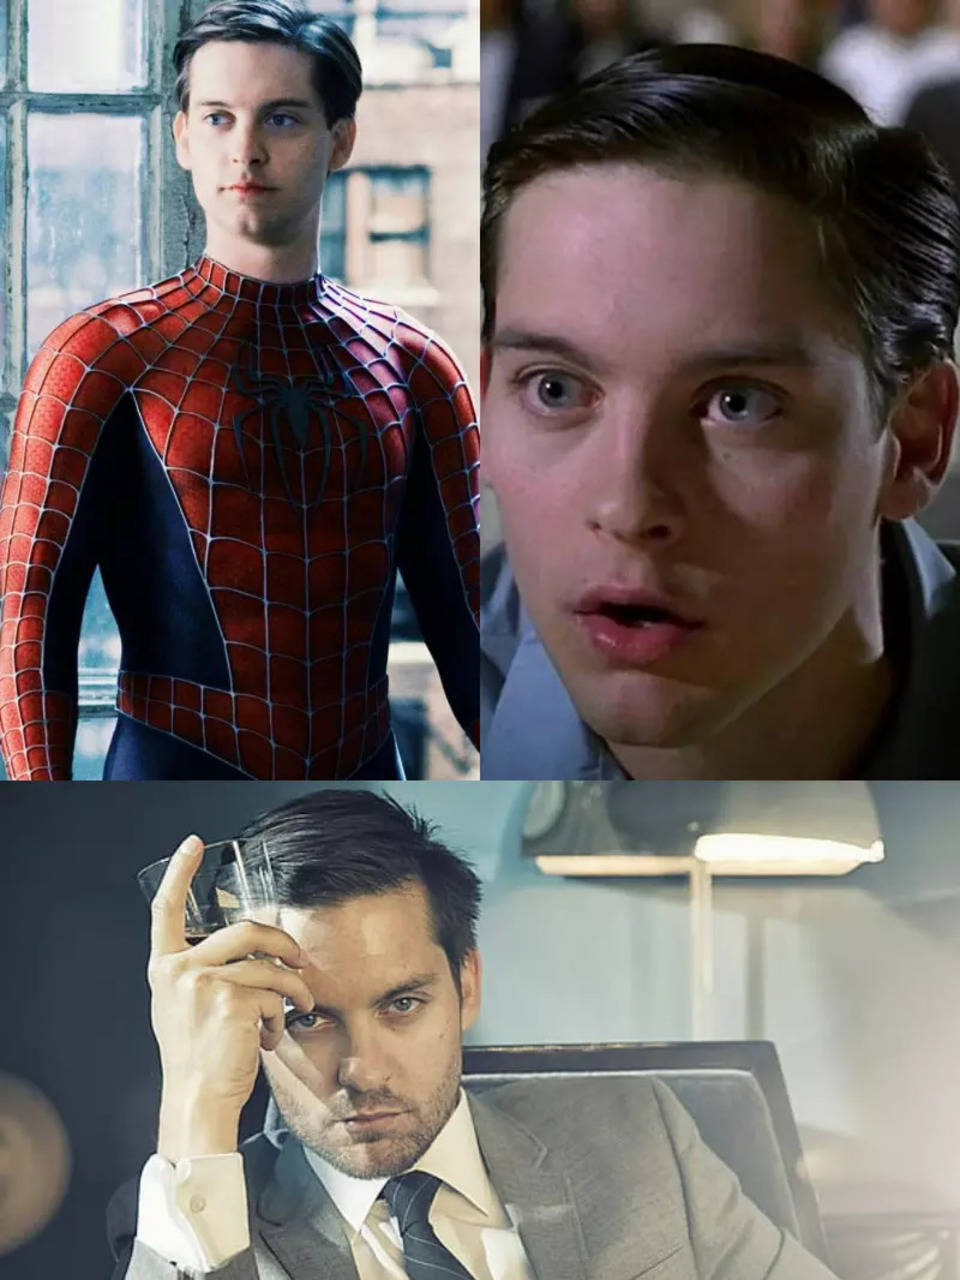 Tobey Maguire - Movies, Spider Man & Career